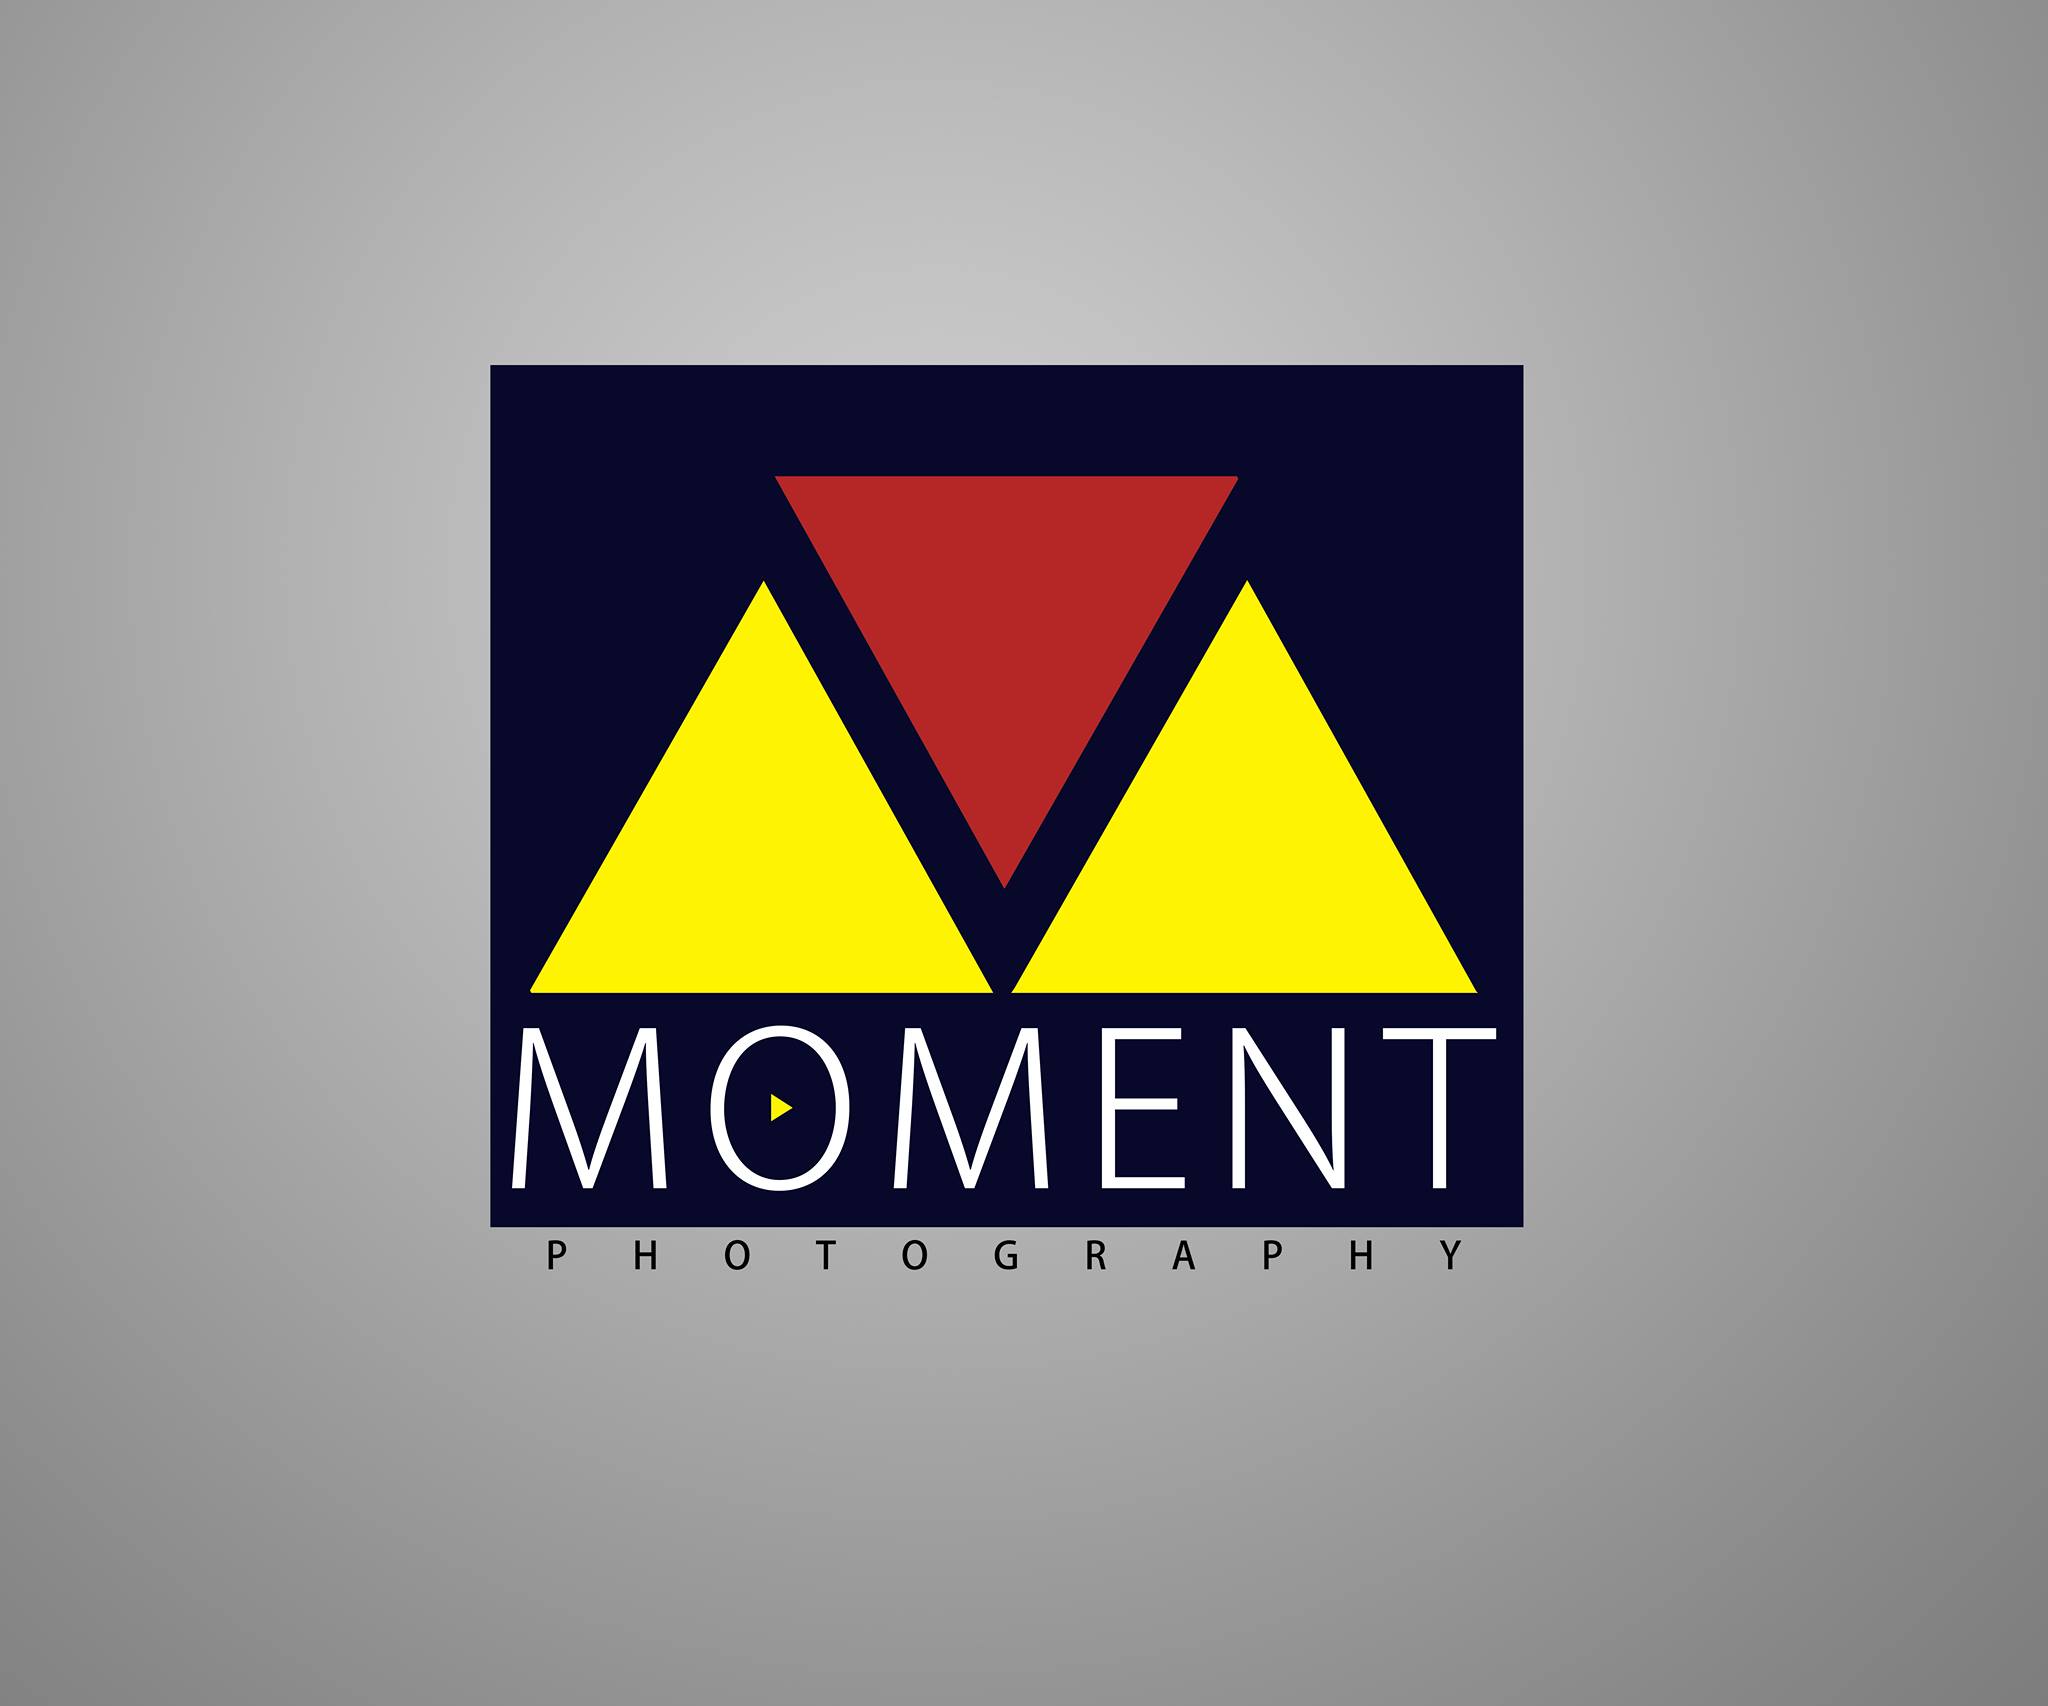 Moment photography|Photographer|Event Services